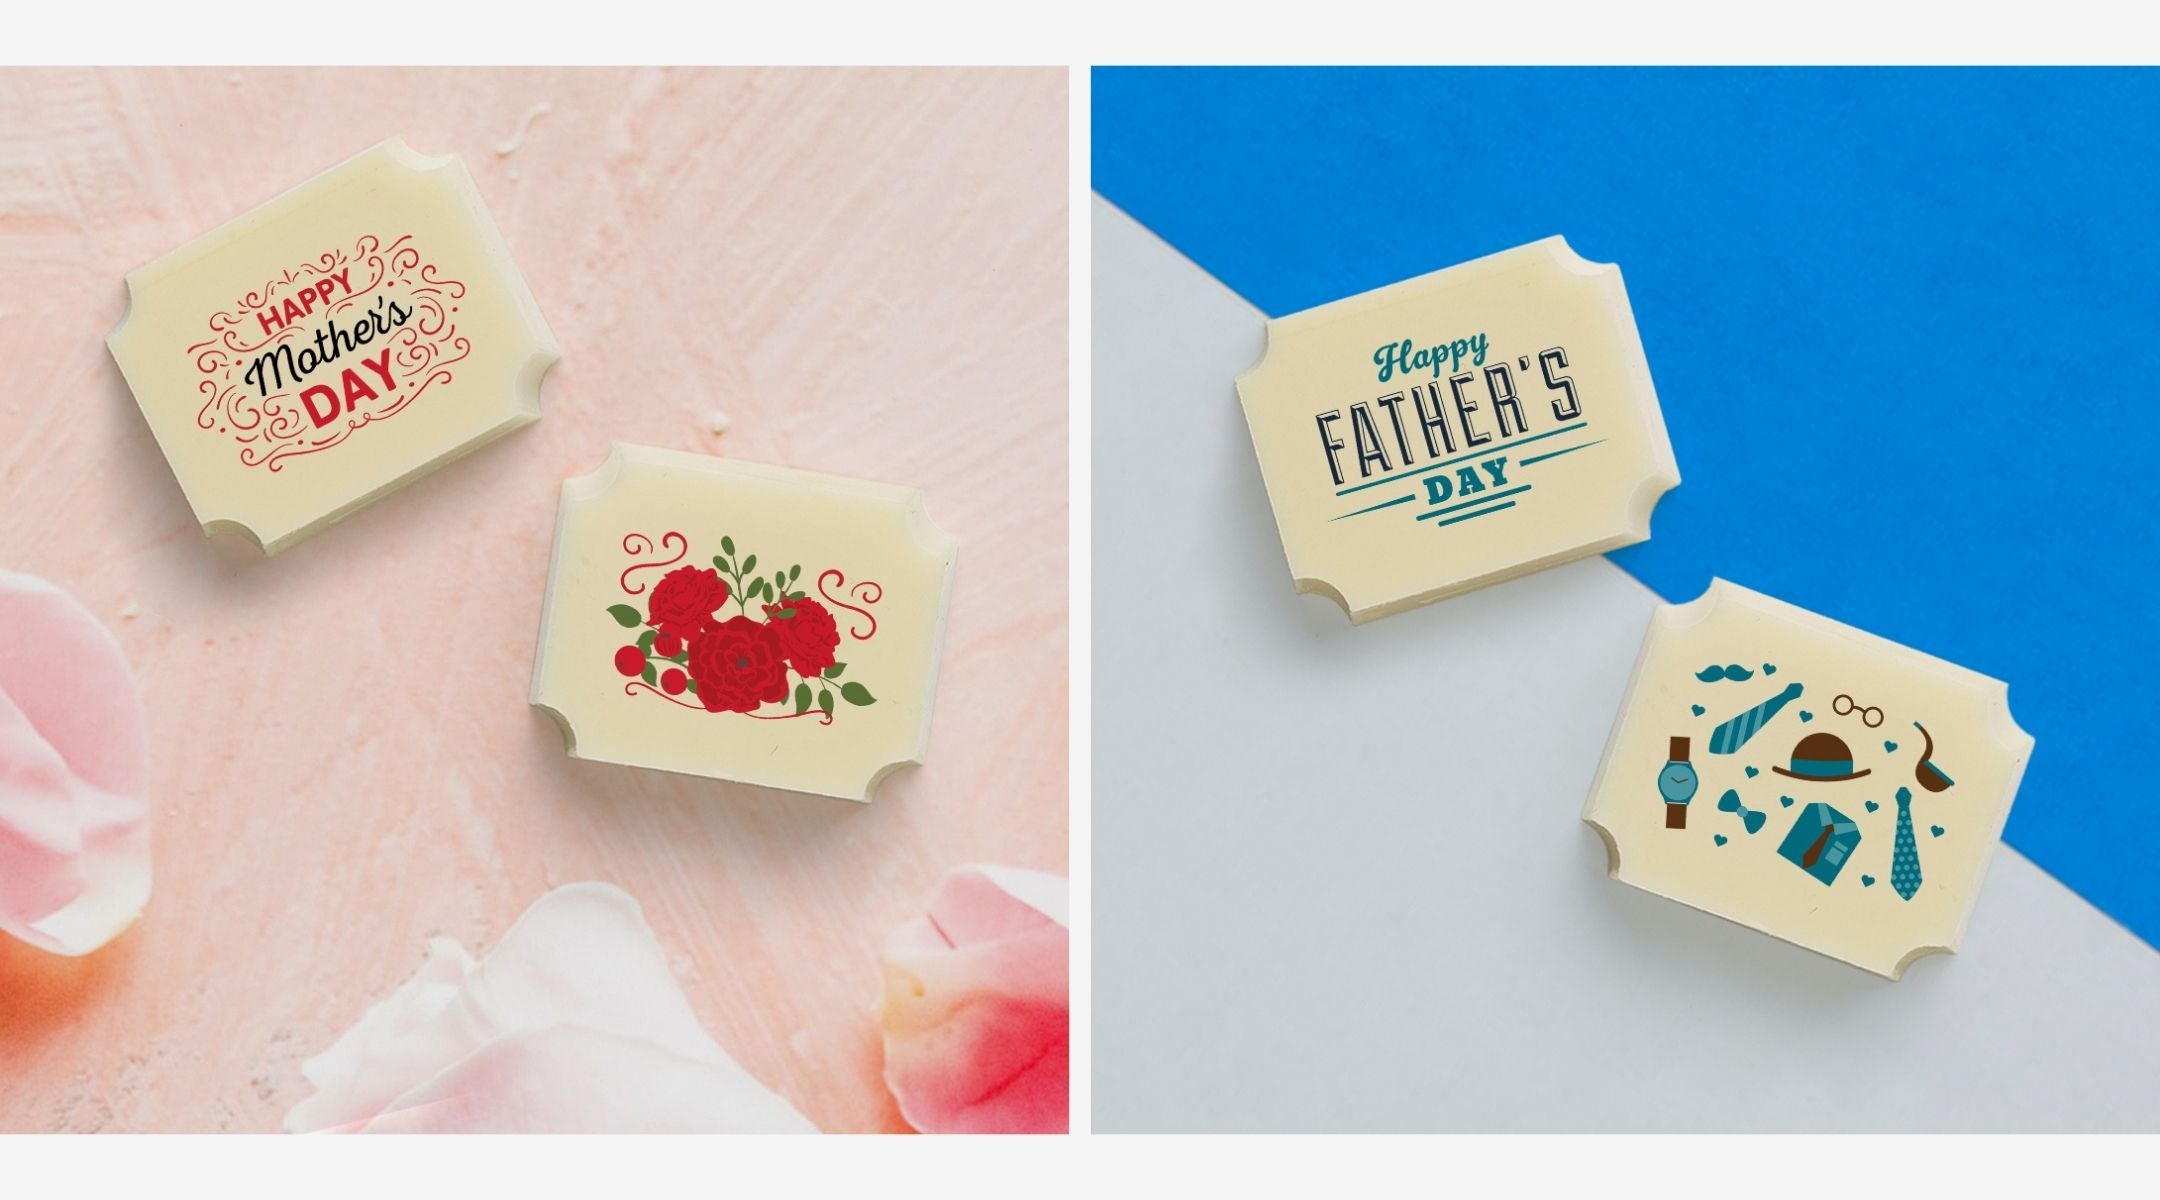 White chocolates featuring Happy Mother's Day and Happy Father's Day messages